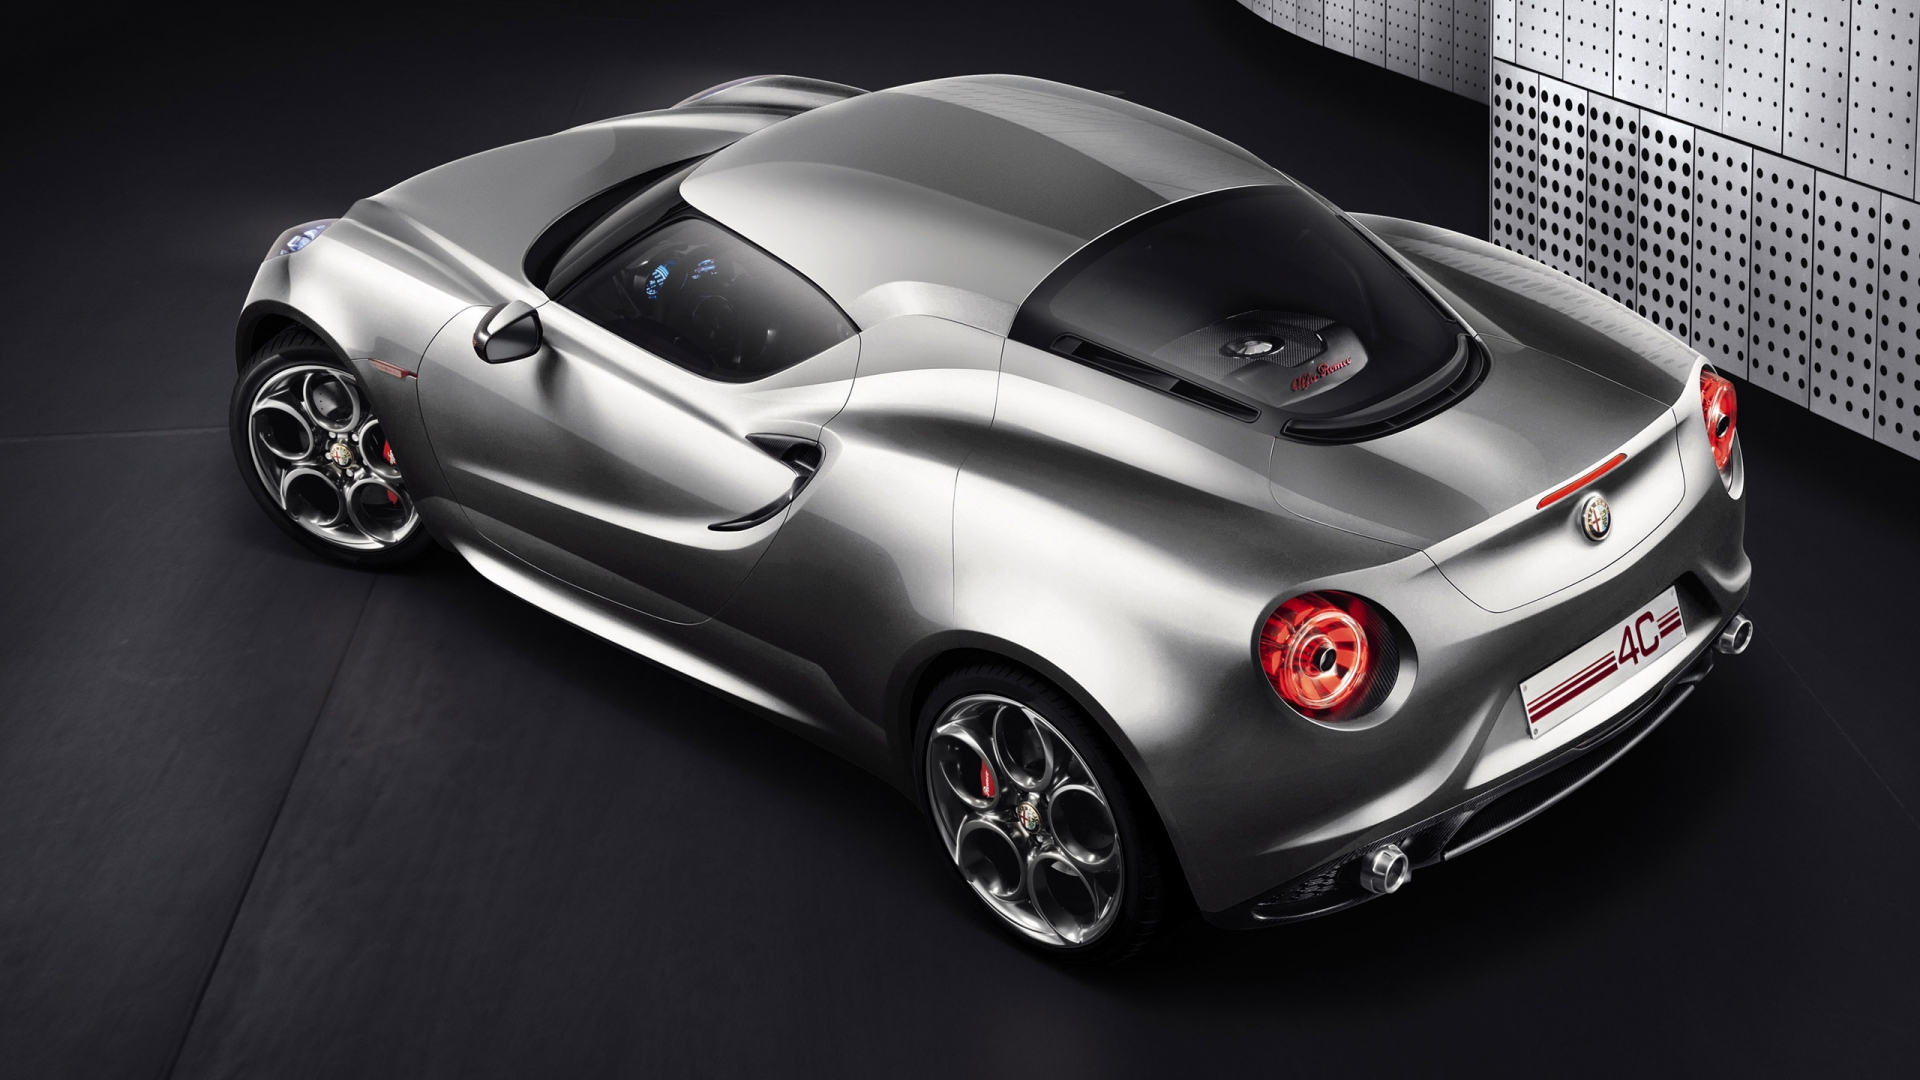 Alfa 4c Concept Rear Top View for 1920 x 1080 HDTV 1080p resolution